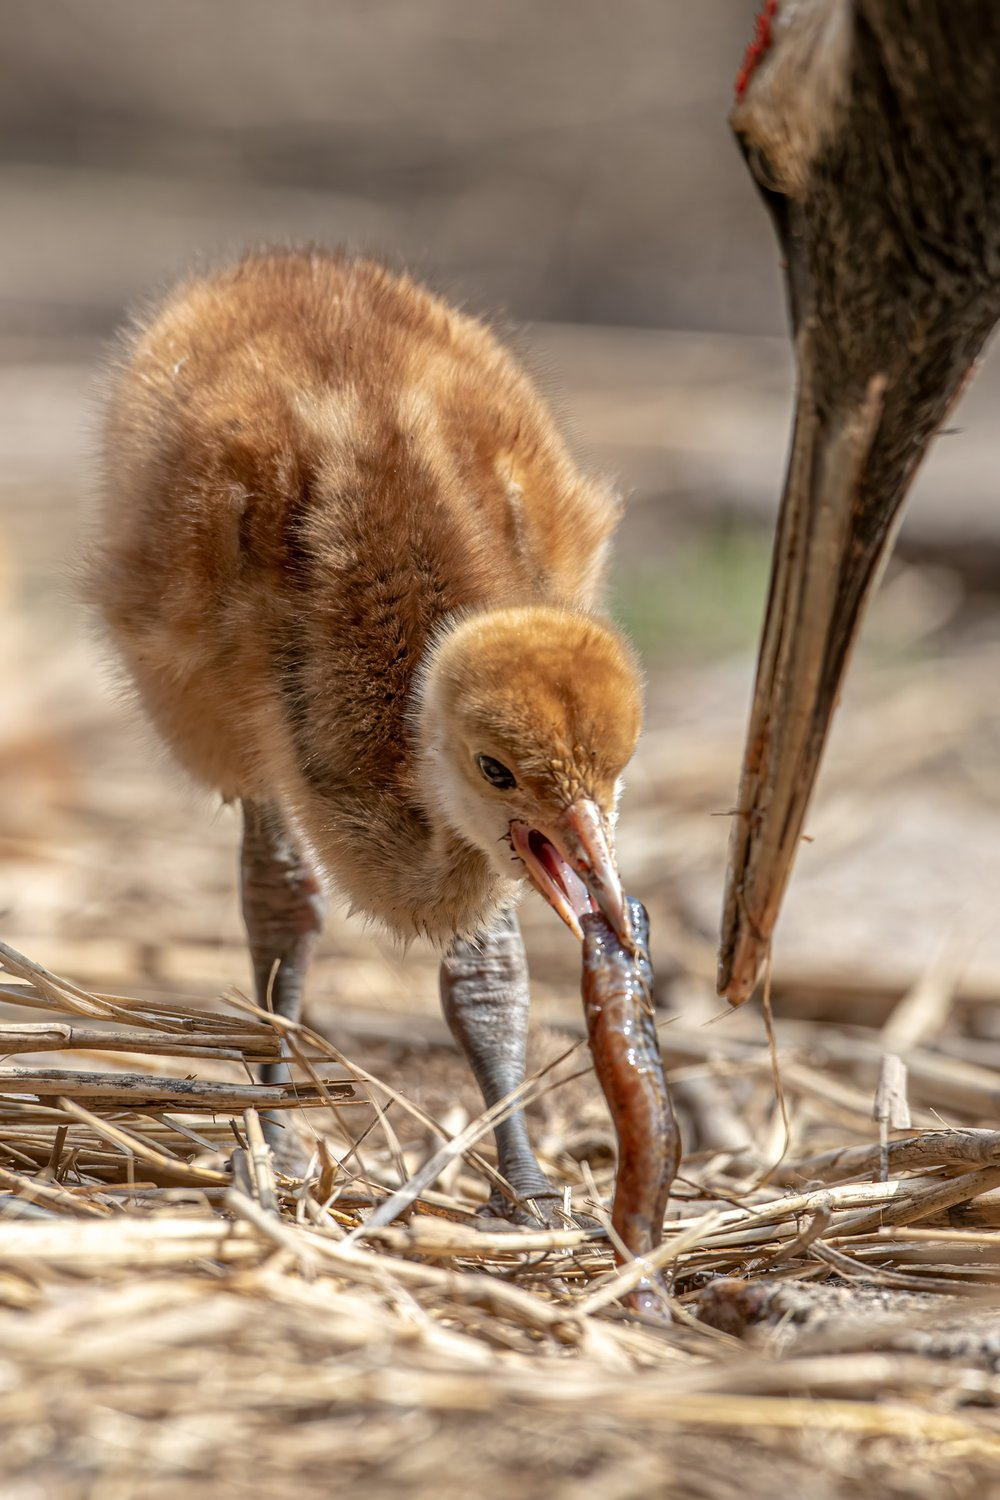 A female Japanese crane feeds a chick with fish - Japanese Crane, Chick, Feeding, A fish, Cranes, Birds, Wild animals, The national geographic, The photo, Milota, Rare view, Red Book, beauty of nature, Longpost